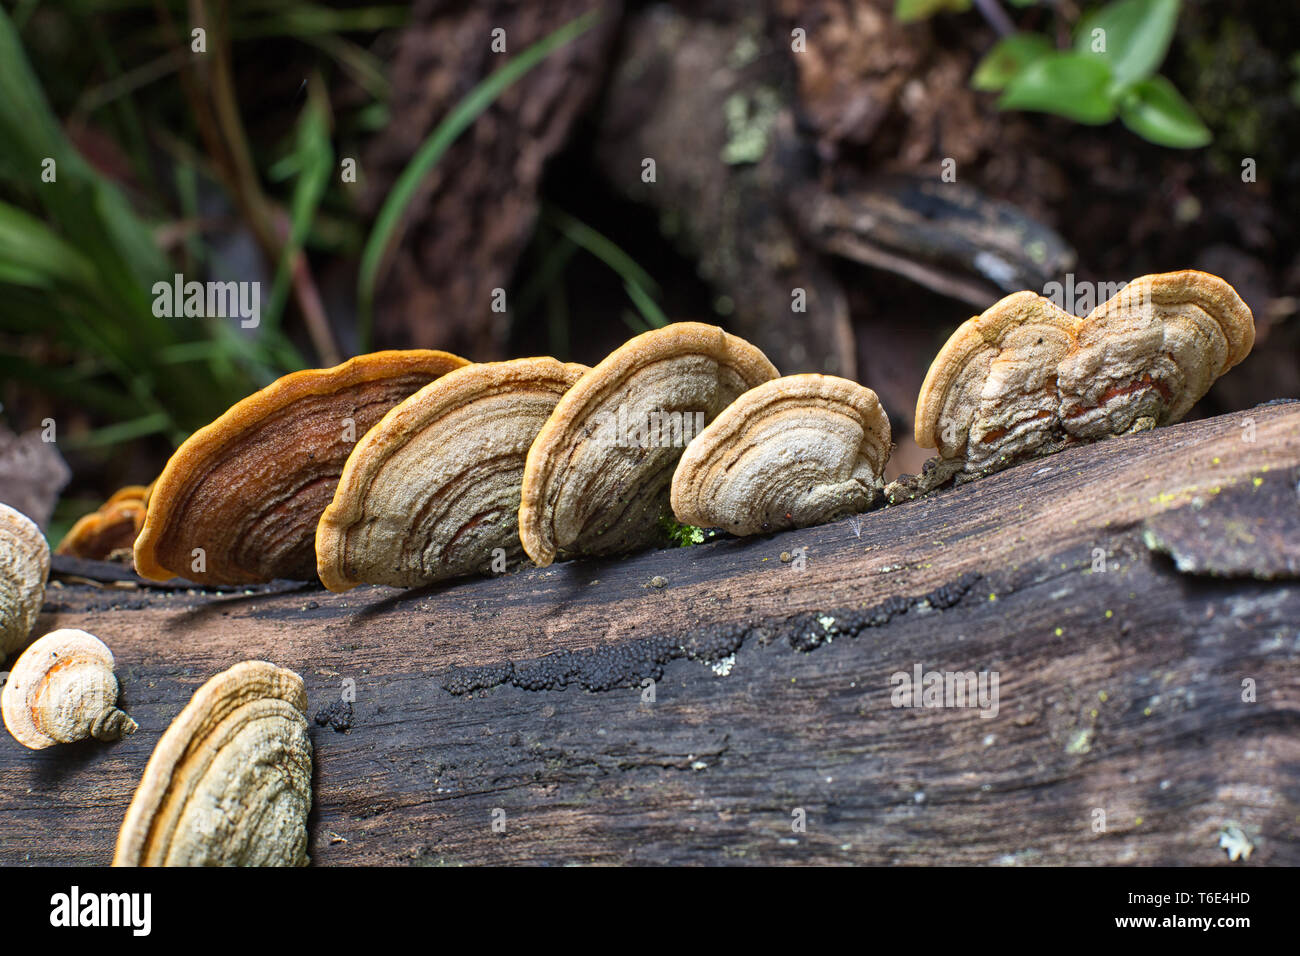 mushrooms growing on tree trunk in Colombia Stock Photo